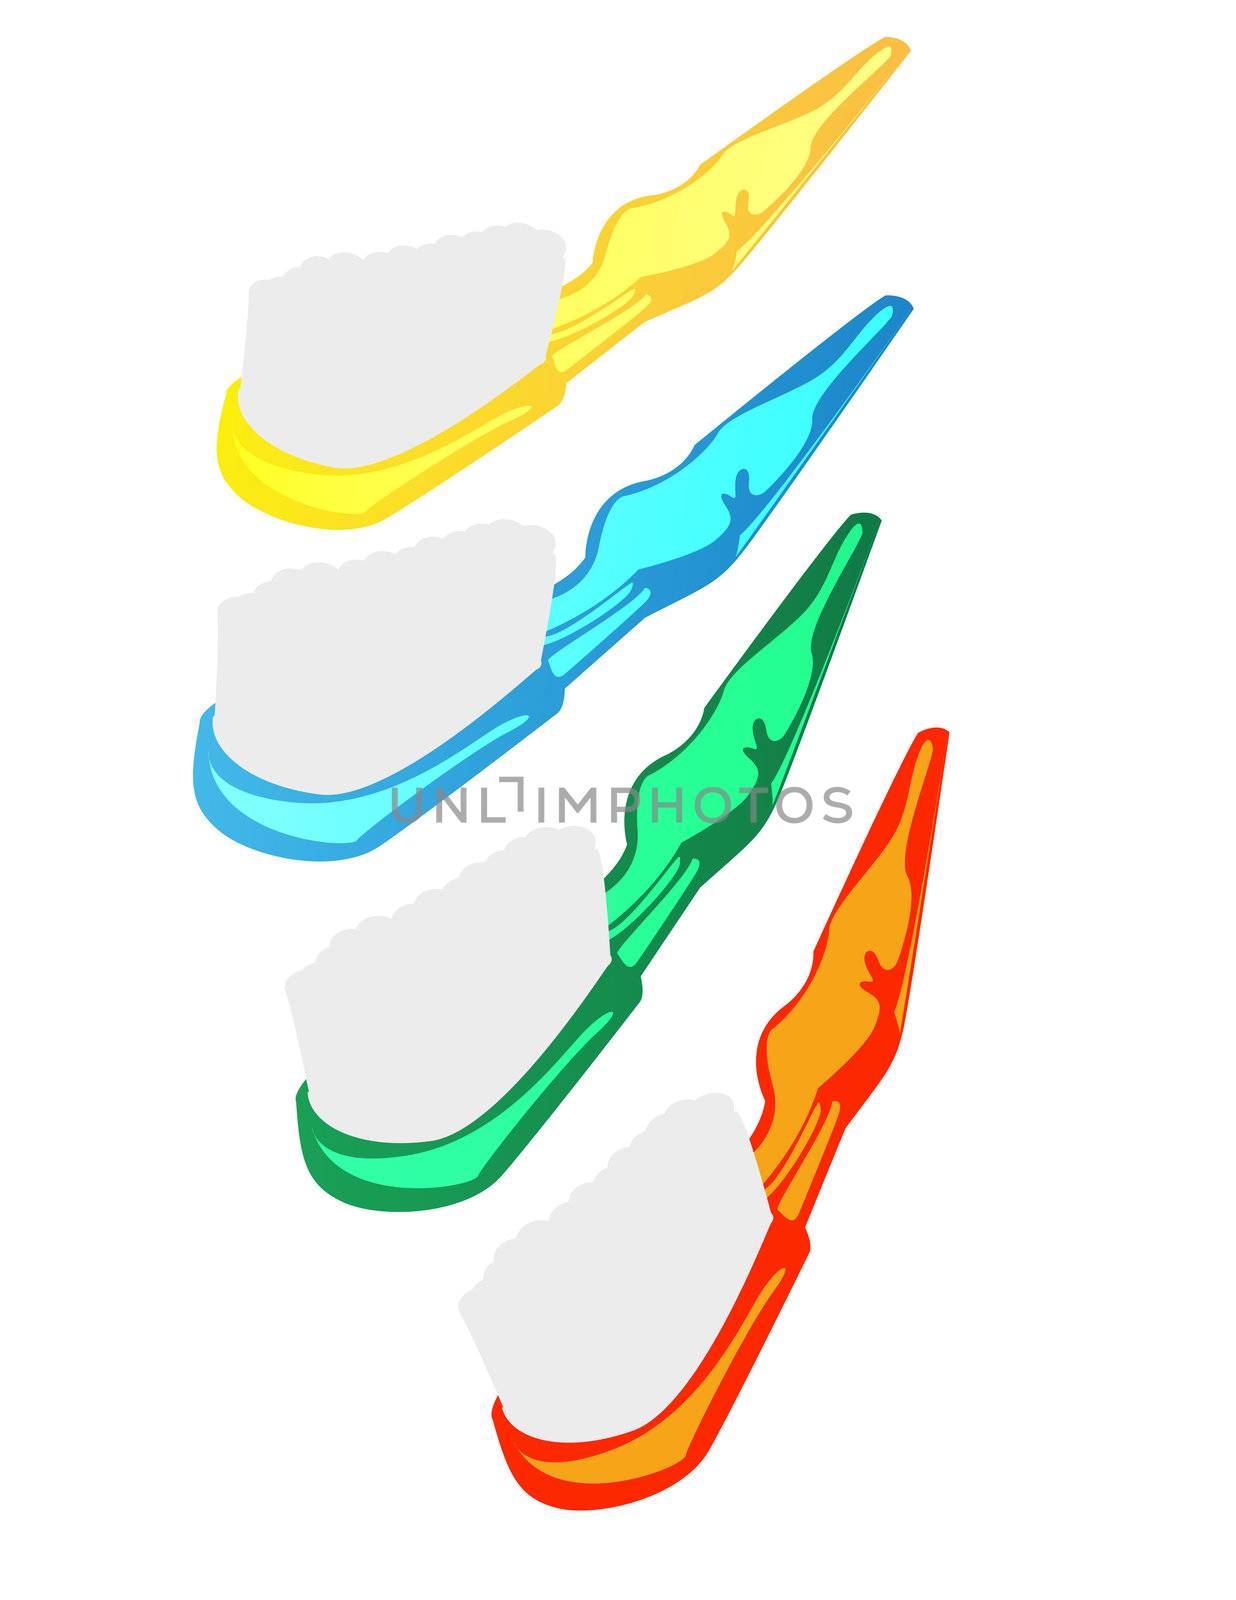 Toothbrushes set, isolated objects over white background